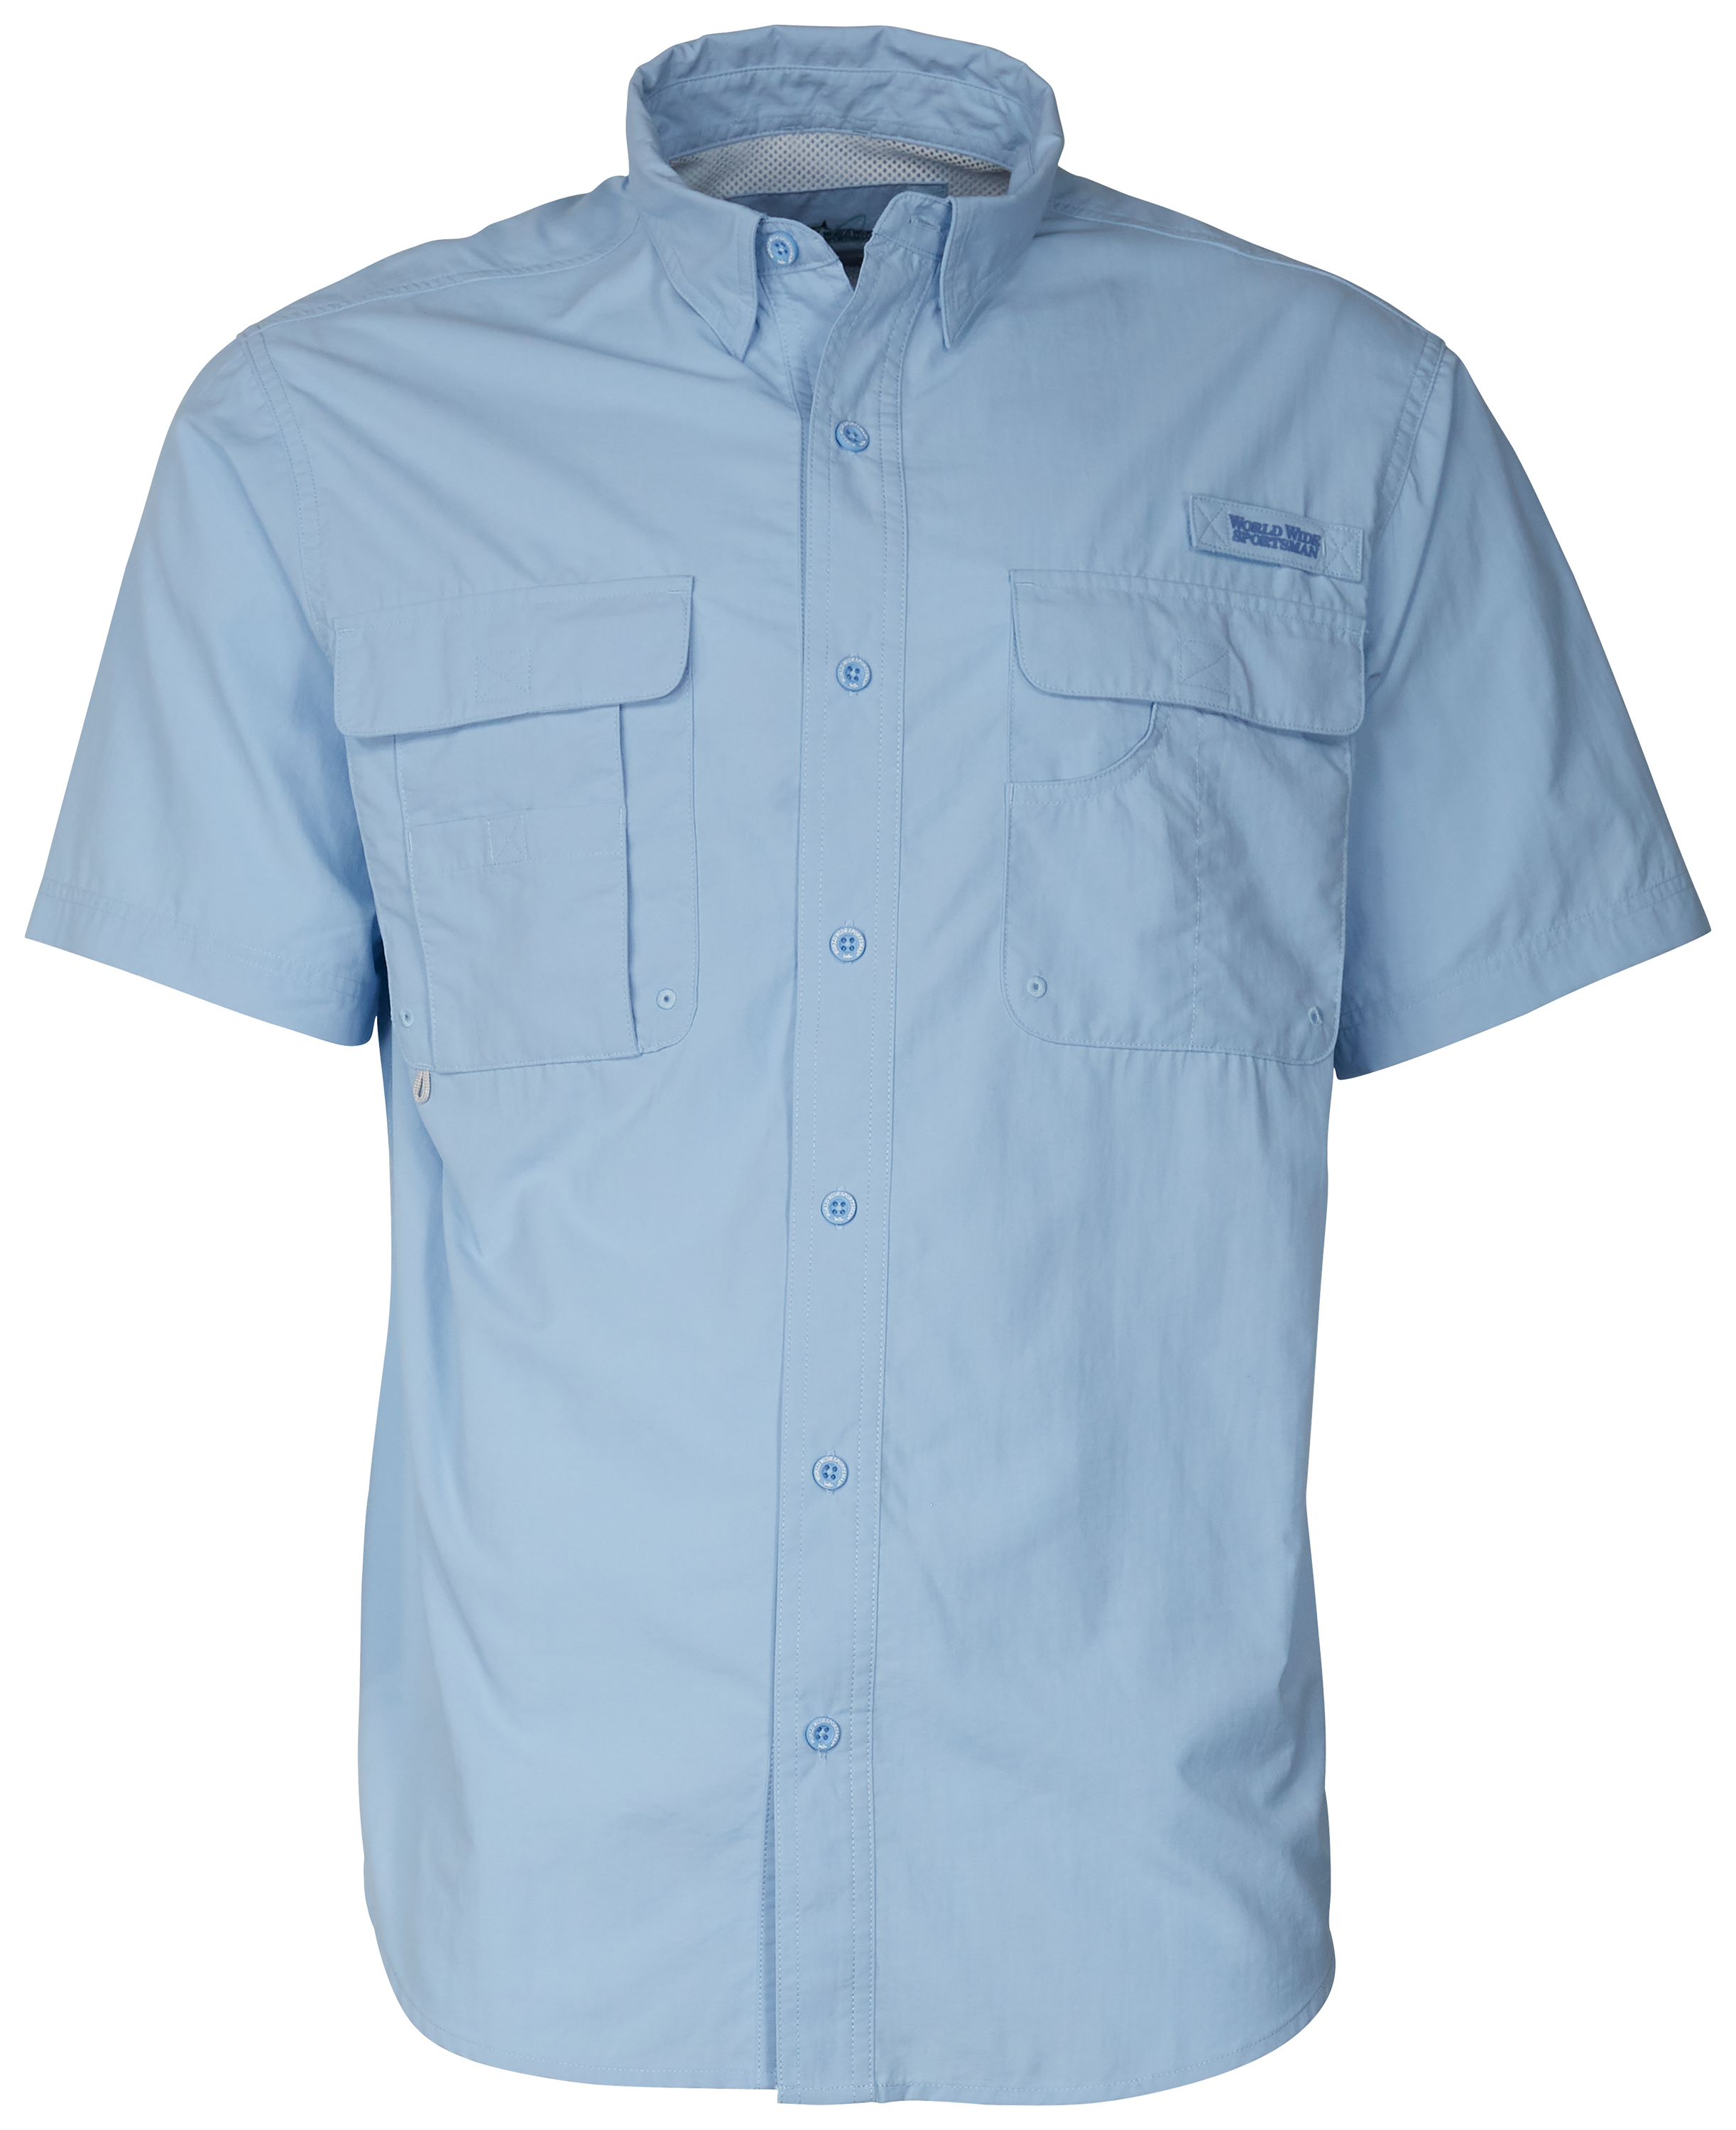 World Wide Sportsman Recycled-Nylon Angler 2.0 Short-Sleeve Button-Down Shirt for Men - Placid Blue - 2XL